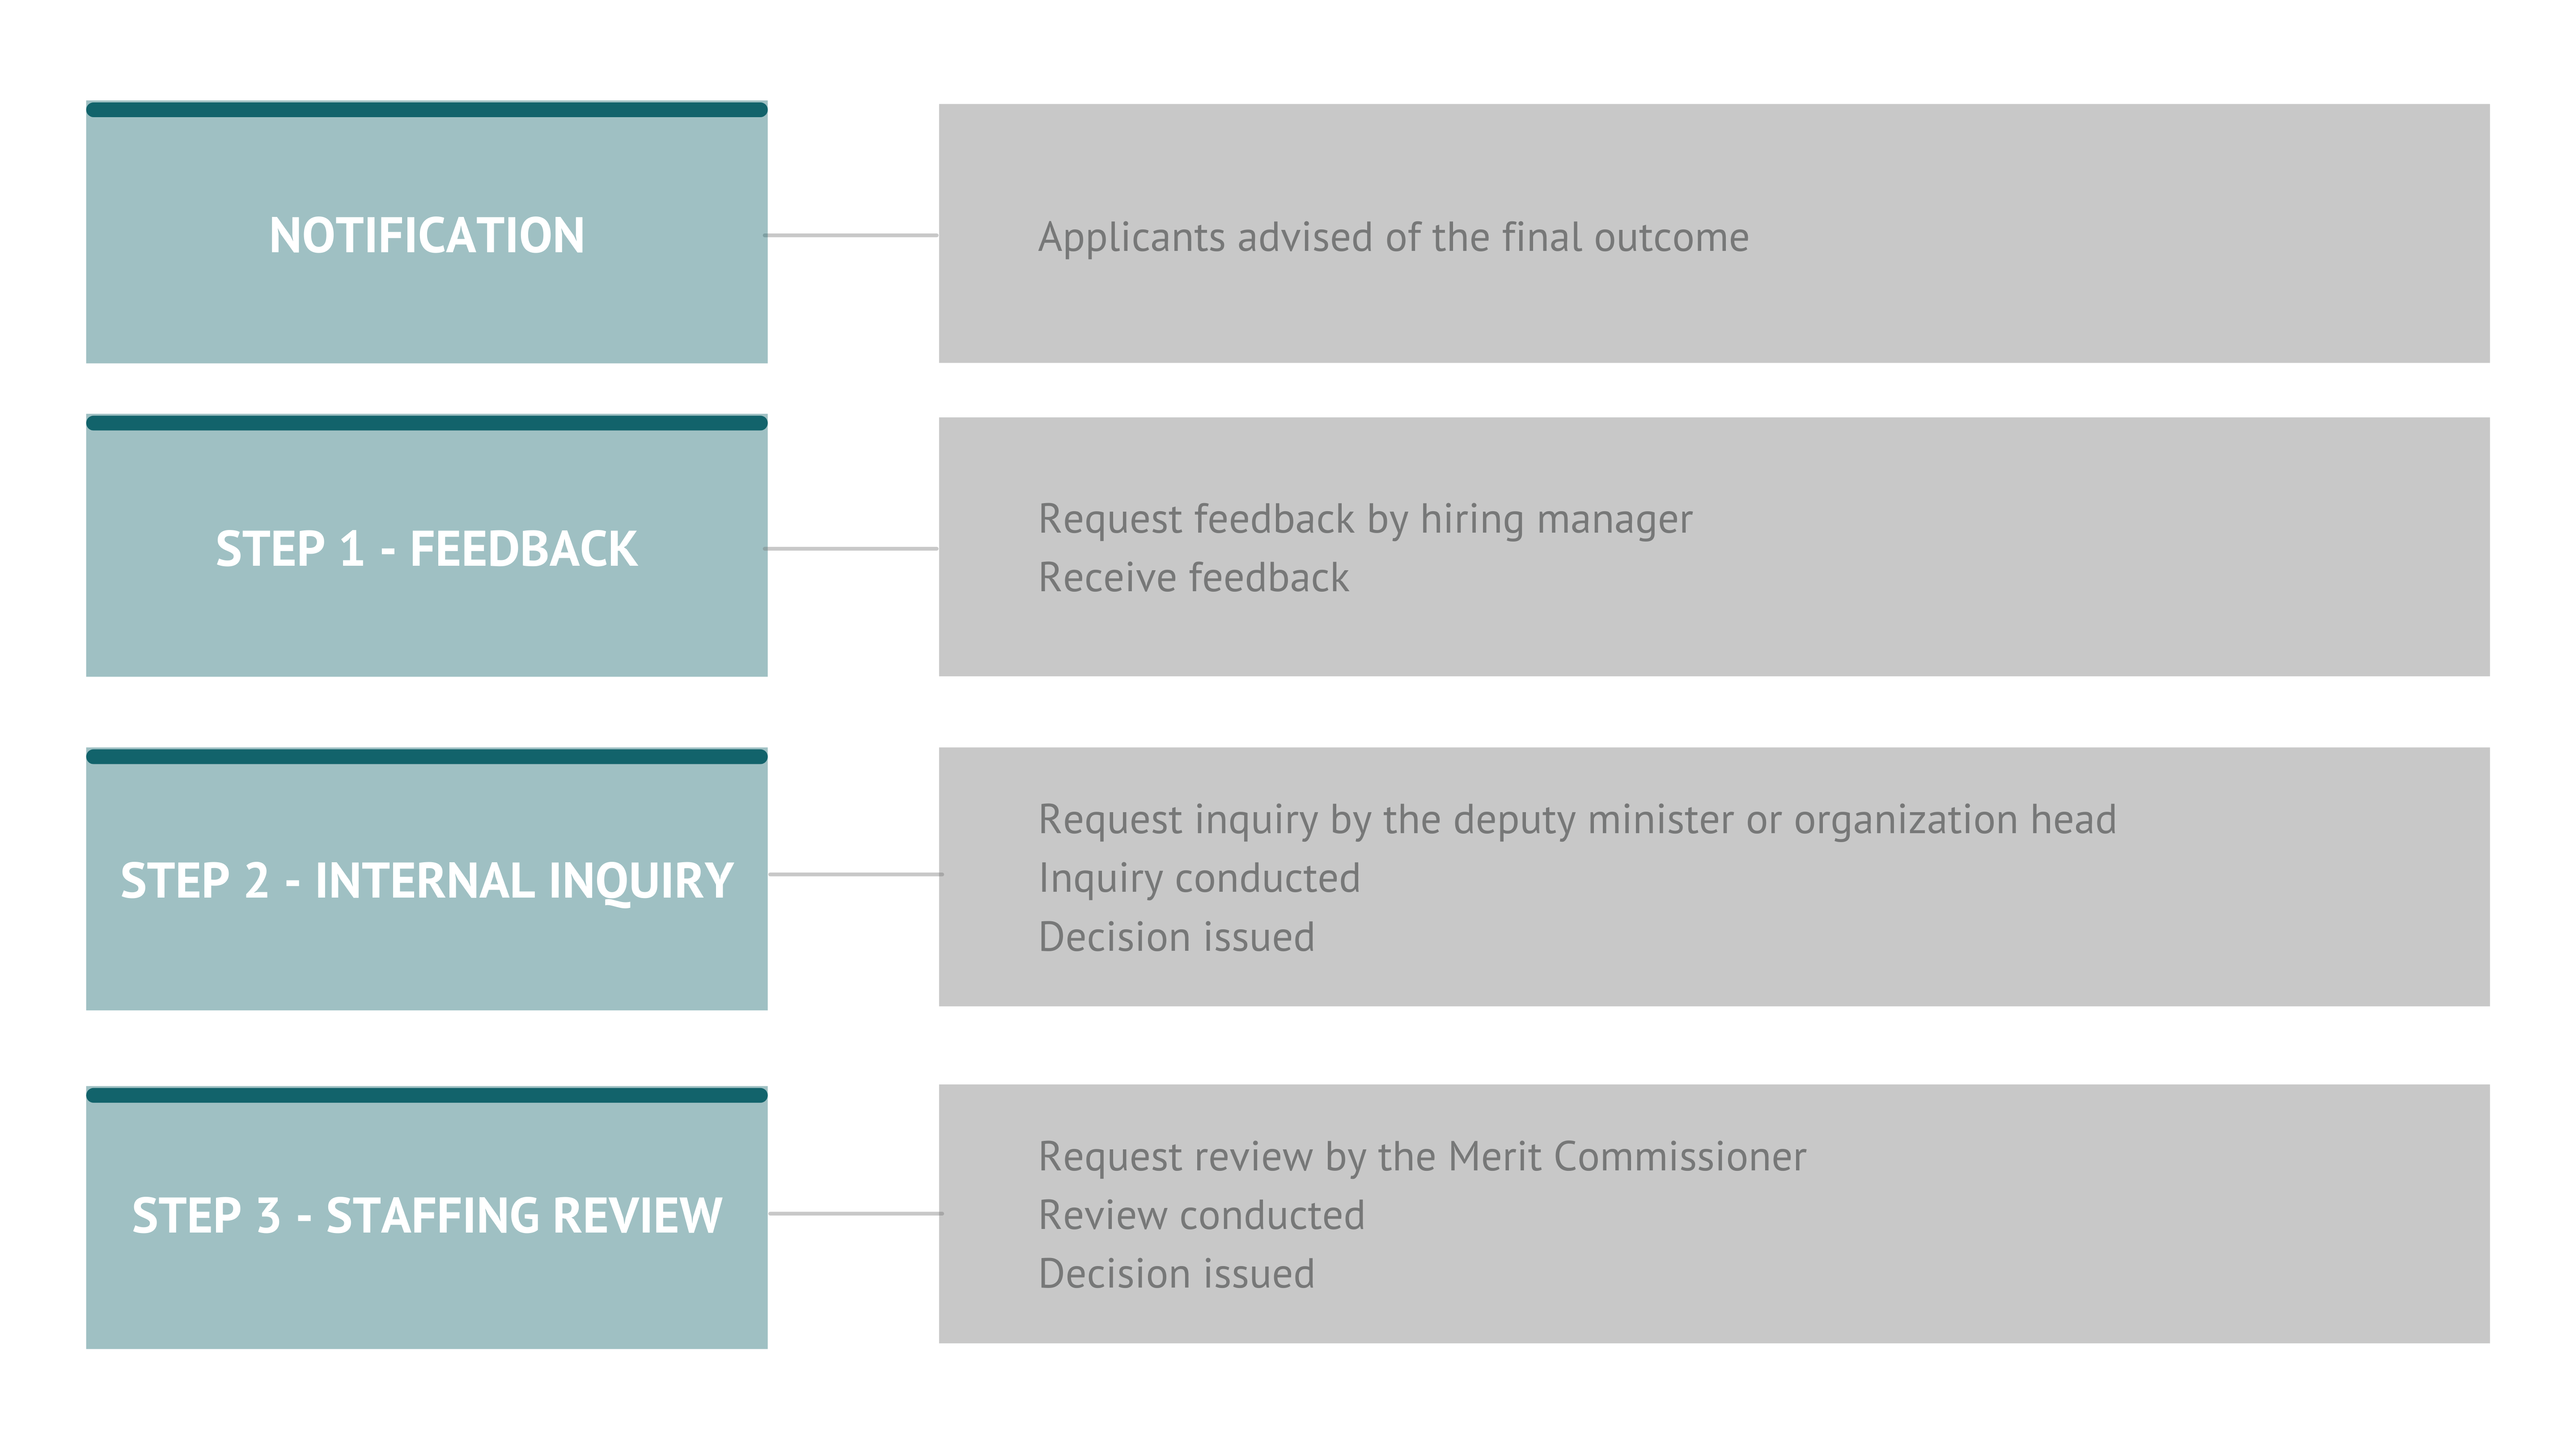 Table summarizing the steps of the audit process: Receive, Examine, Evaluate, Decide, Review, Report.